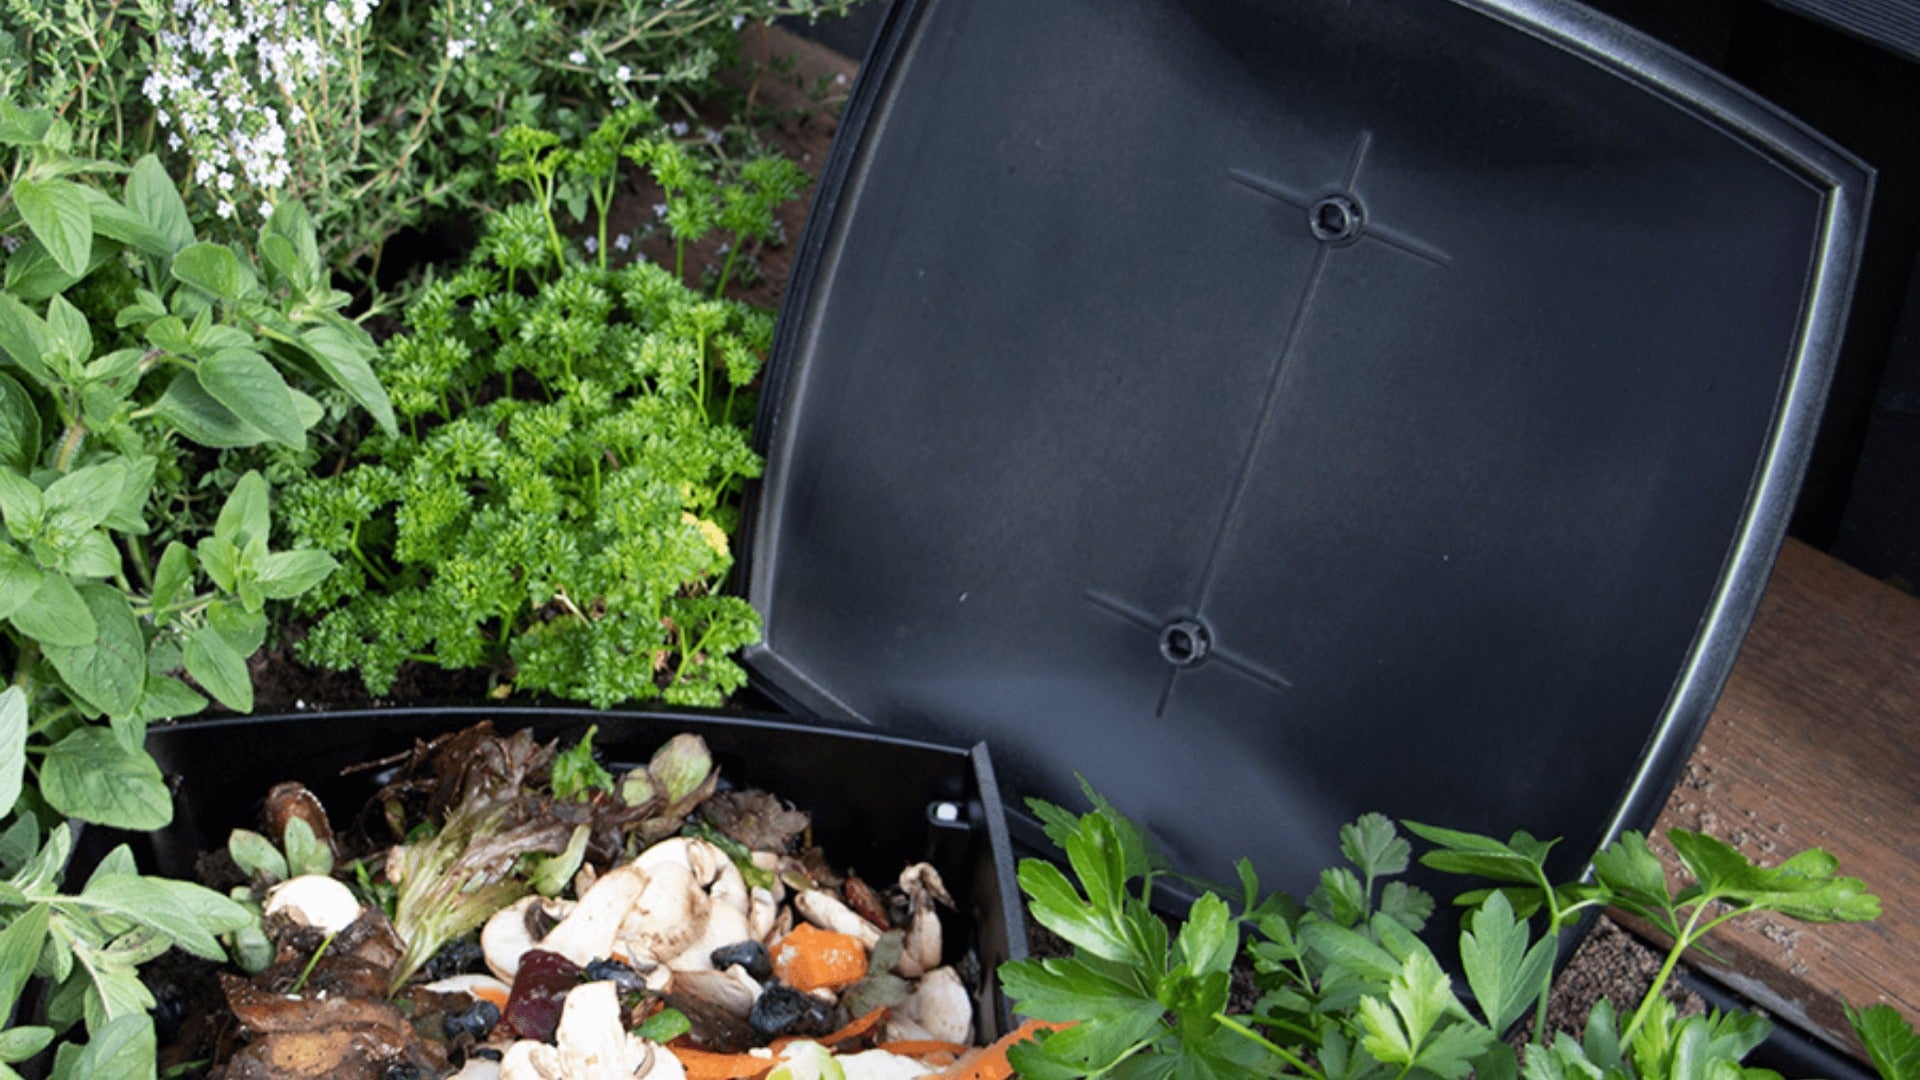 The ‘Worm It All’ Worm Composter Bin - 11” x 11” x 12.6” Composting Box (Soil Enrichment)